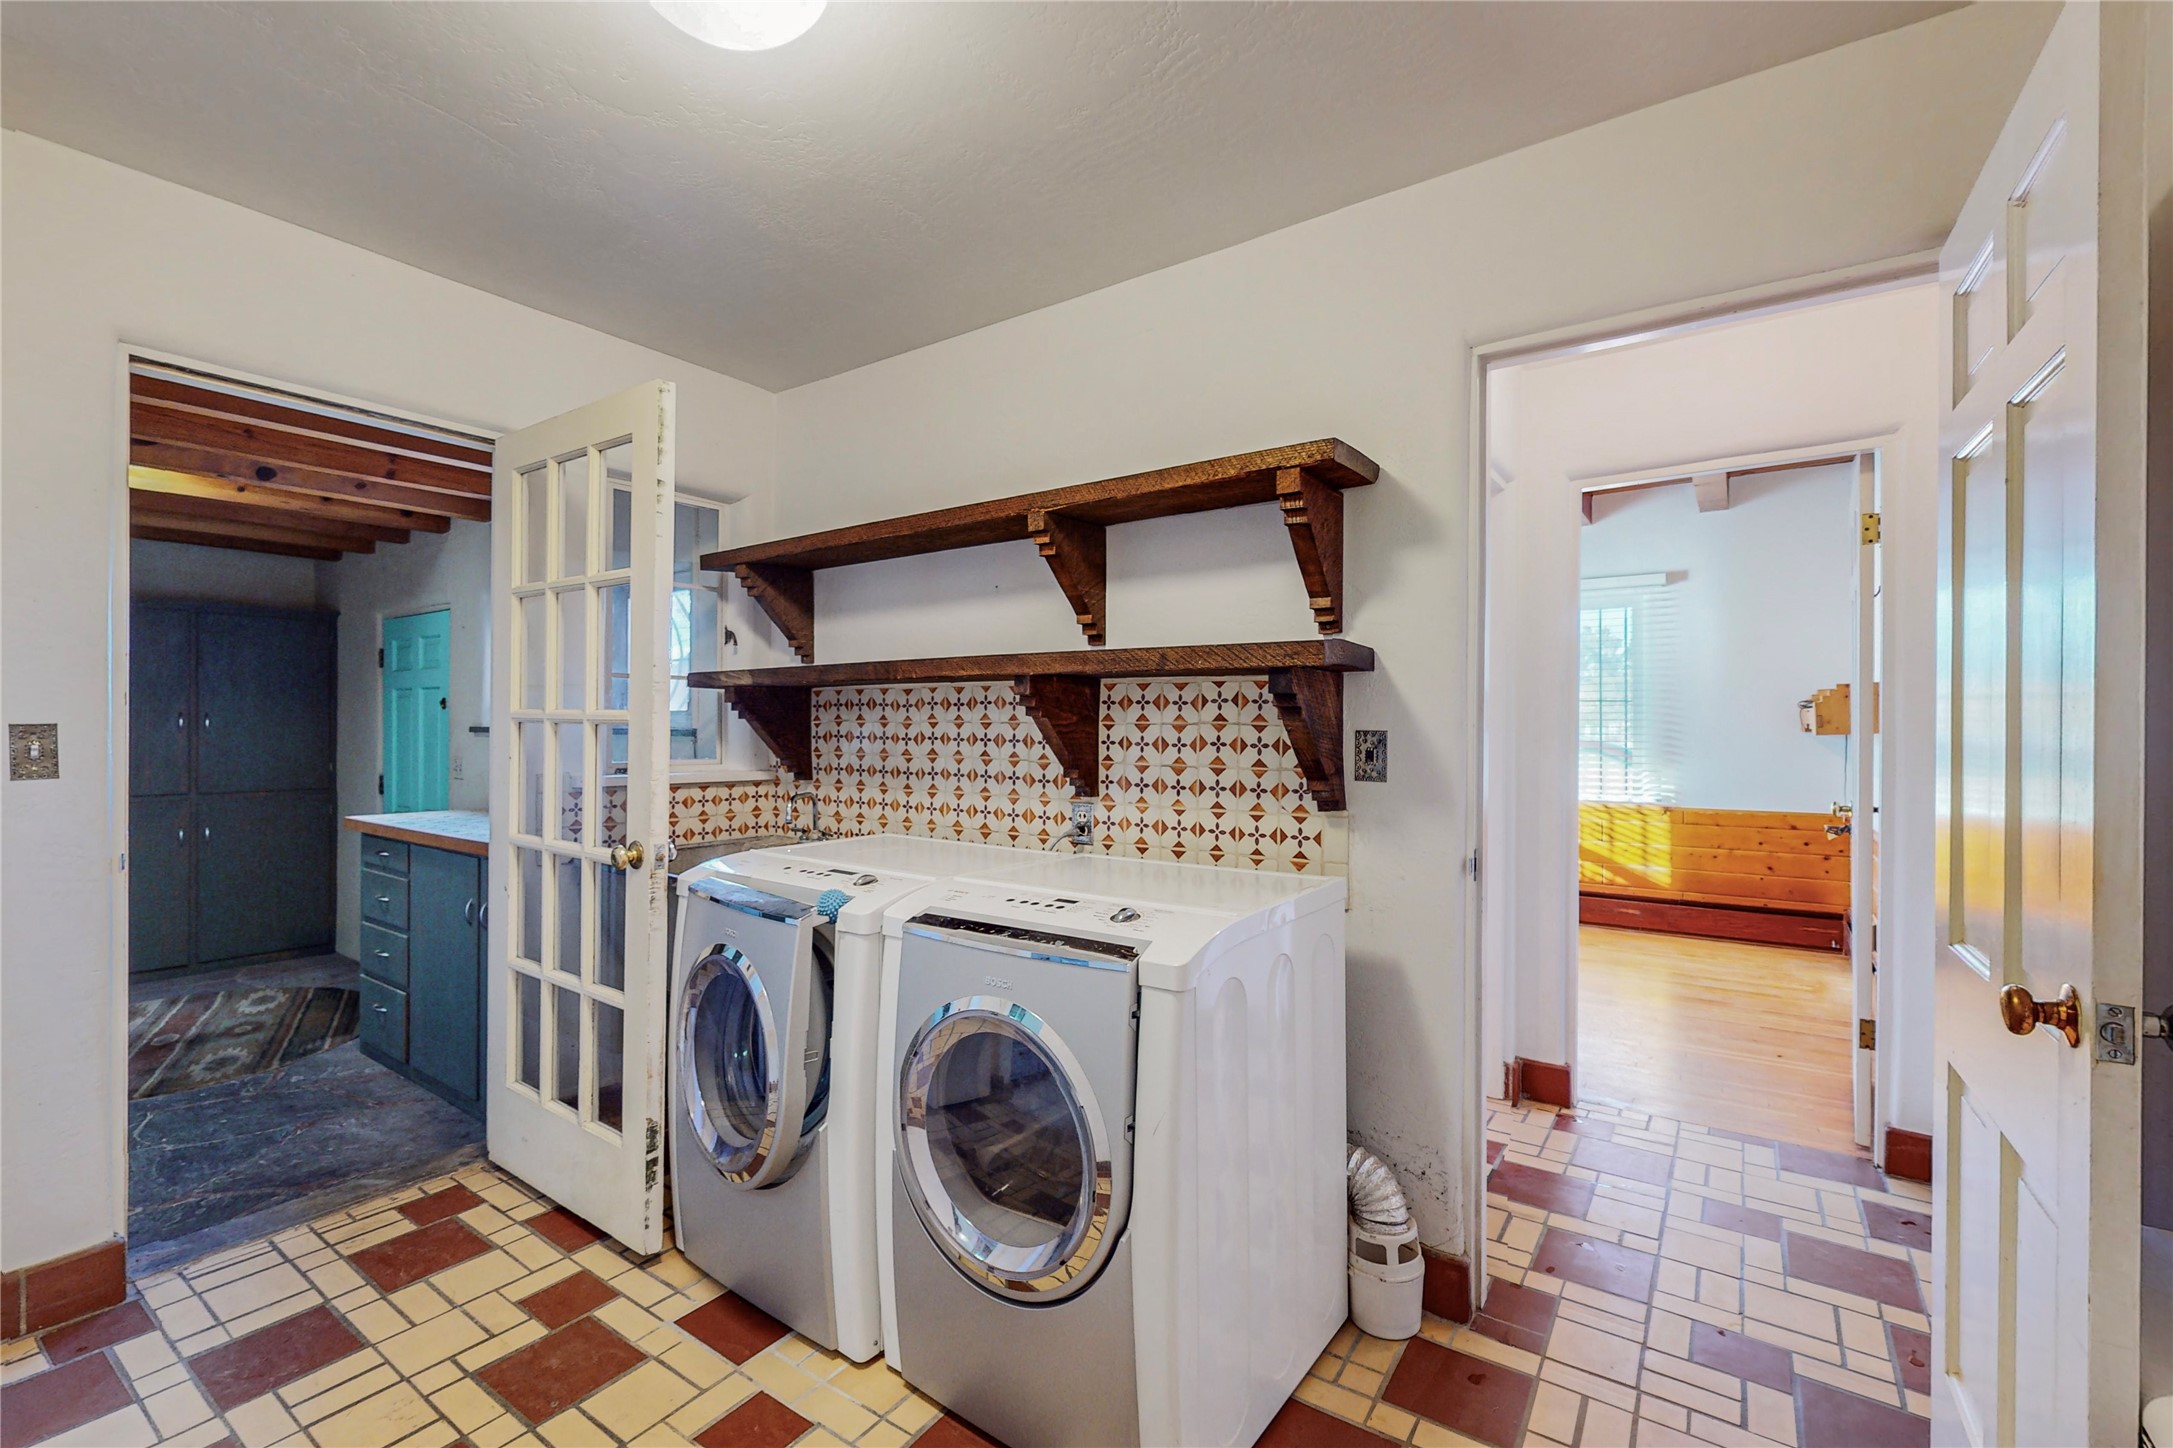 Large laundry room off the mud room.